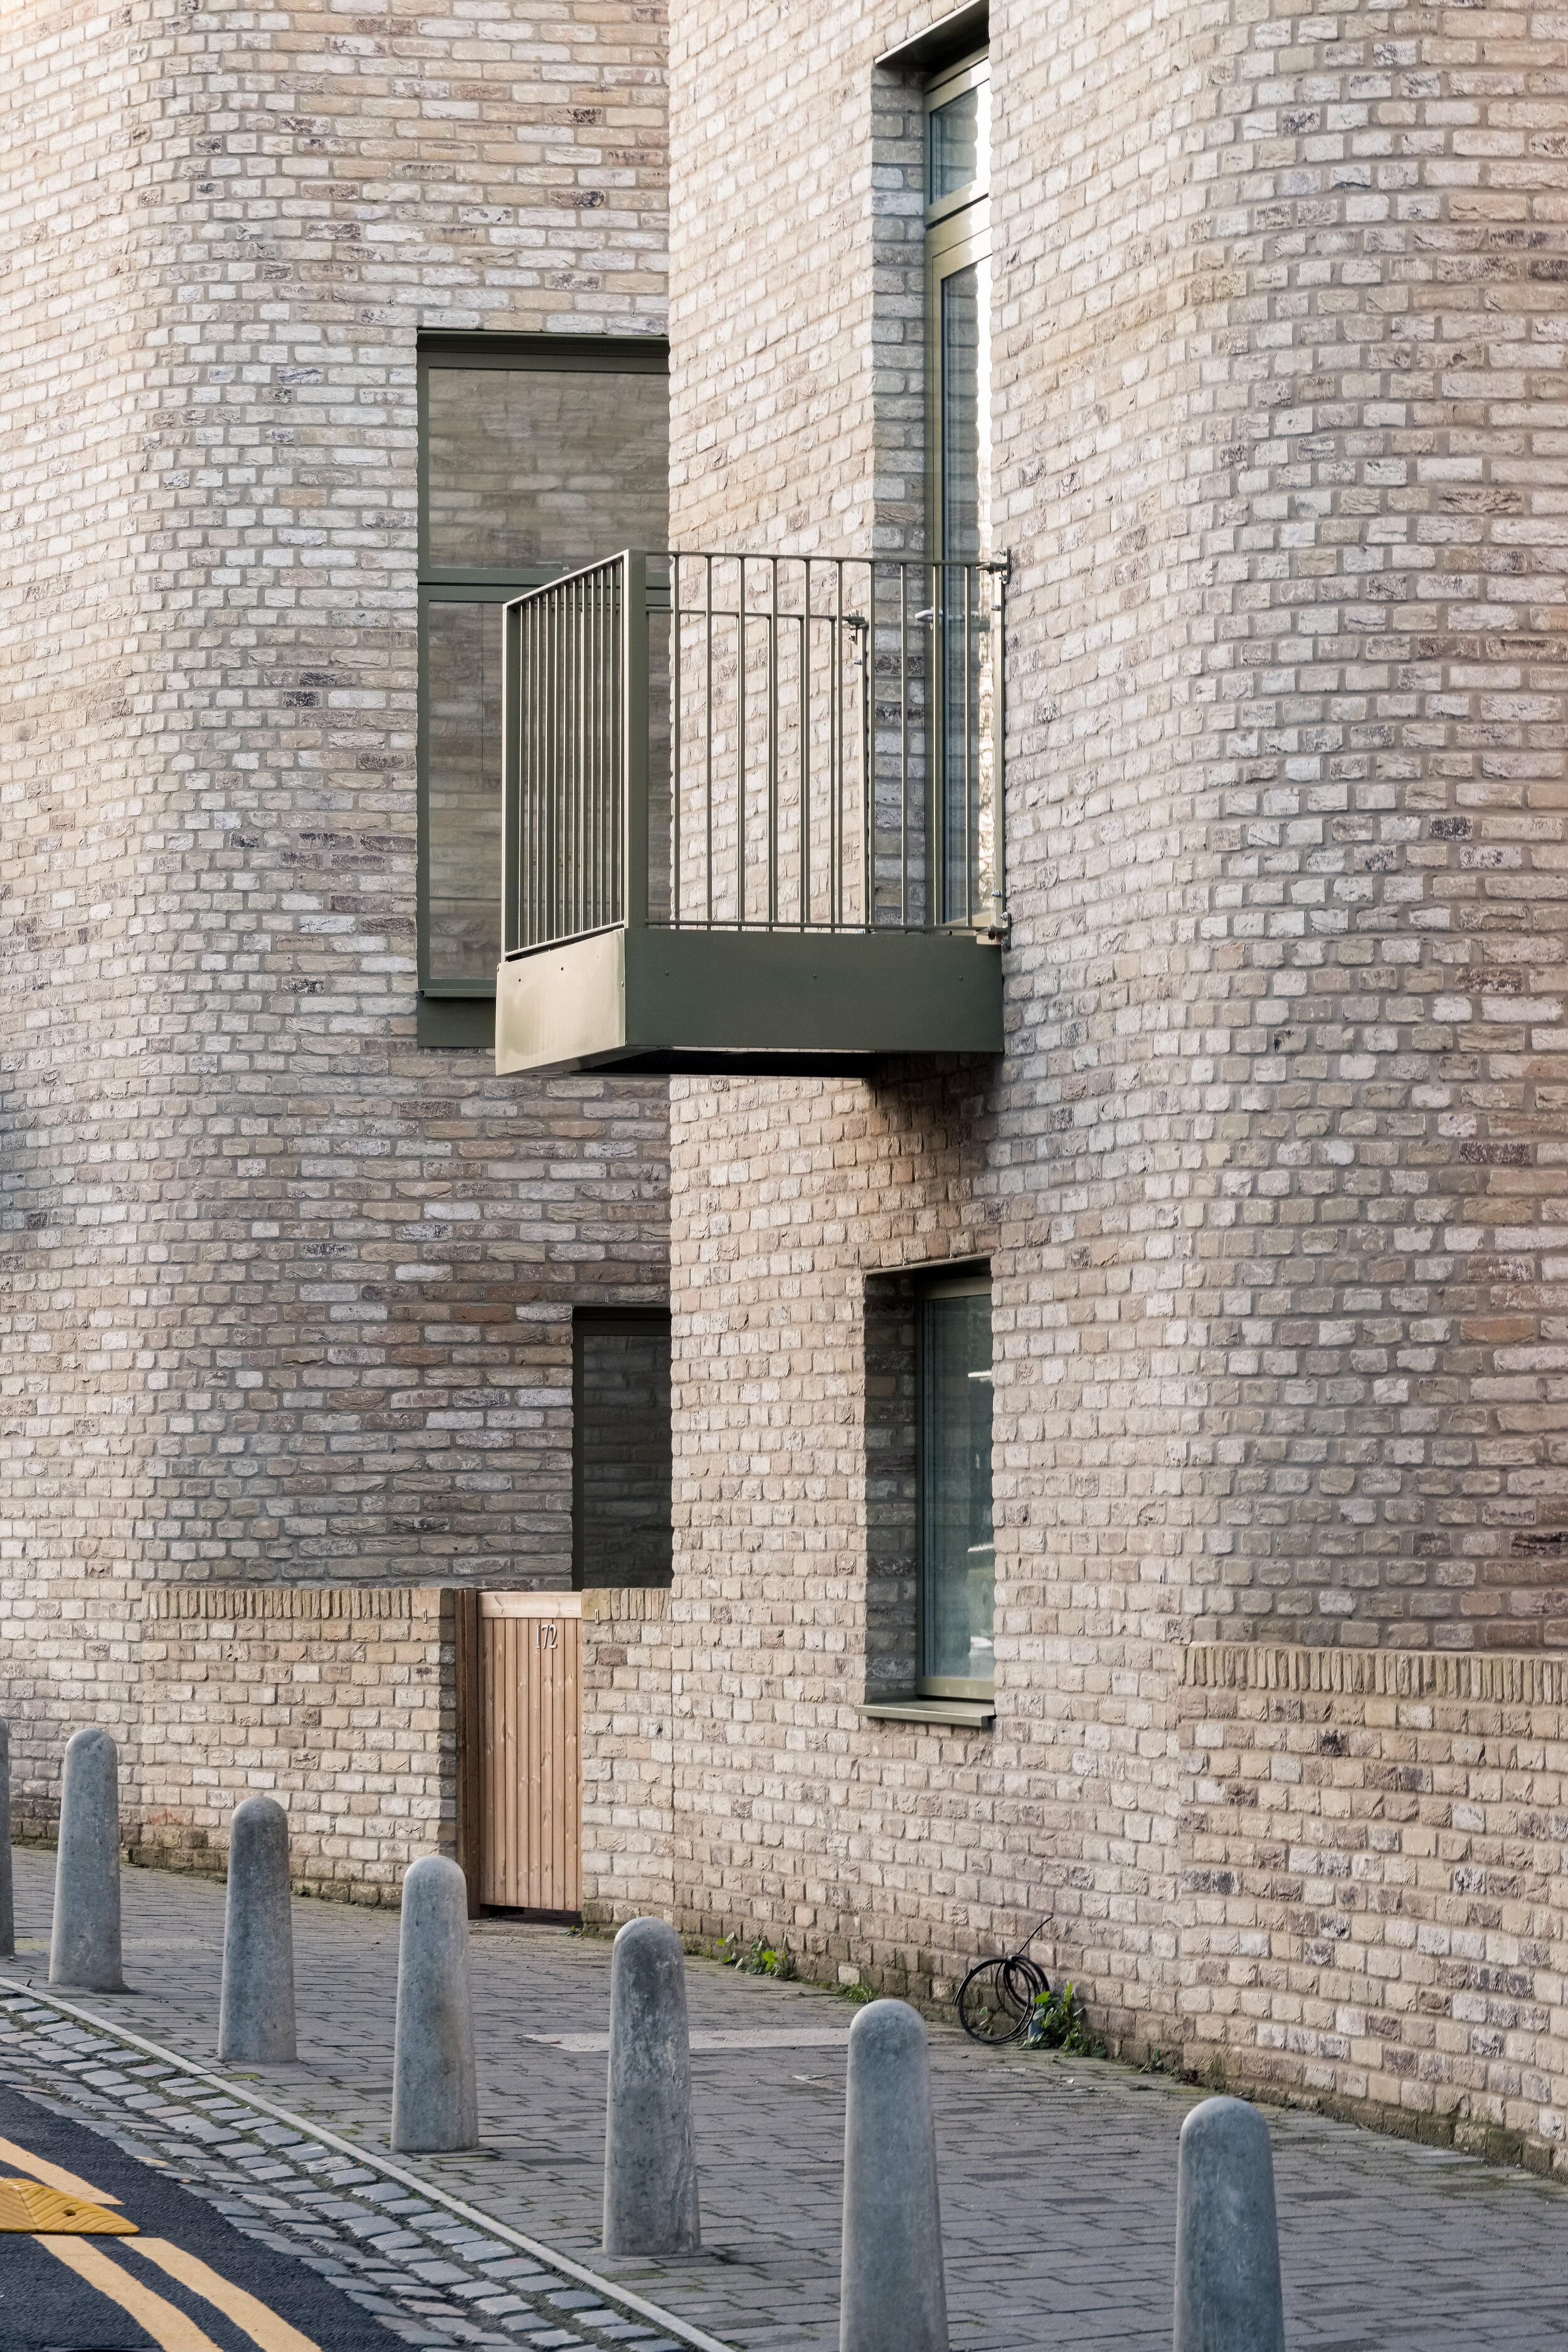 Fred+Howarth+Photography_Kiln+Place_Peter+Barber+Architects_14.jpg